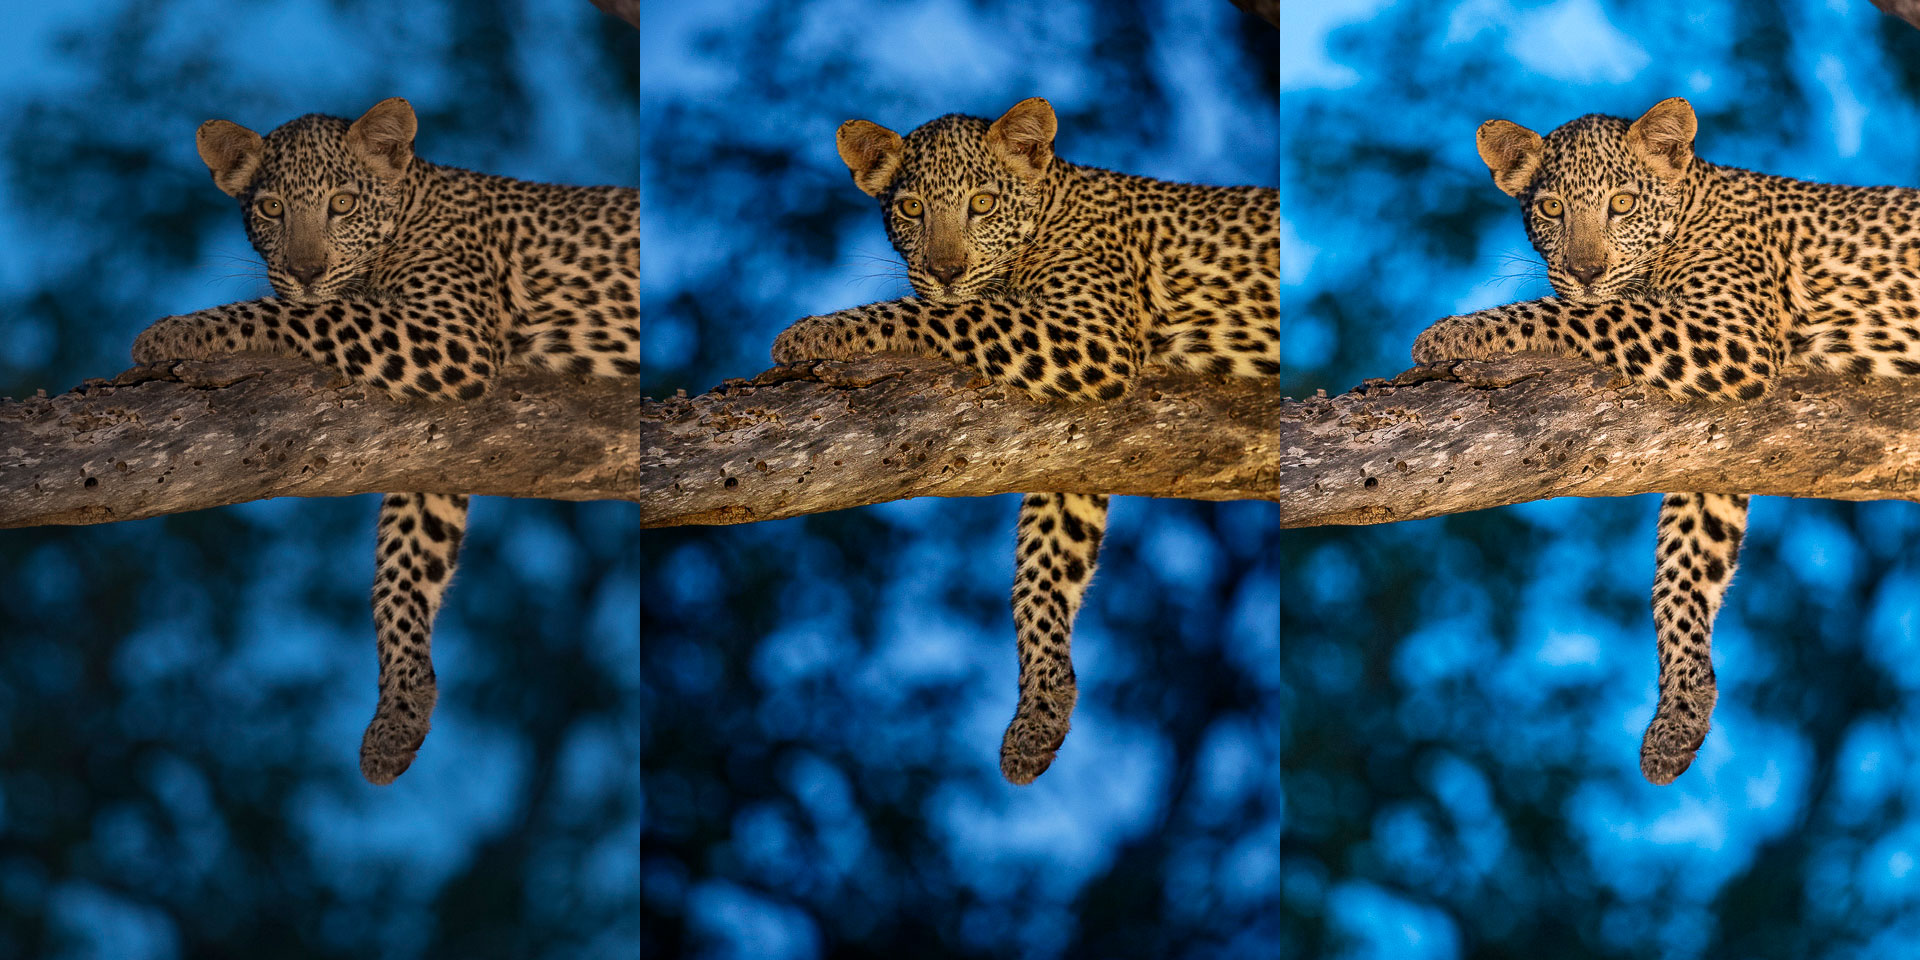 Digital witchcraft and a image of a leopard in a tree